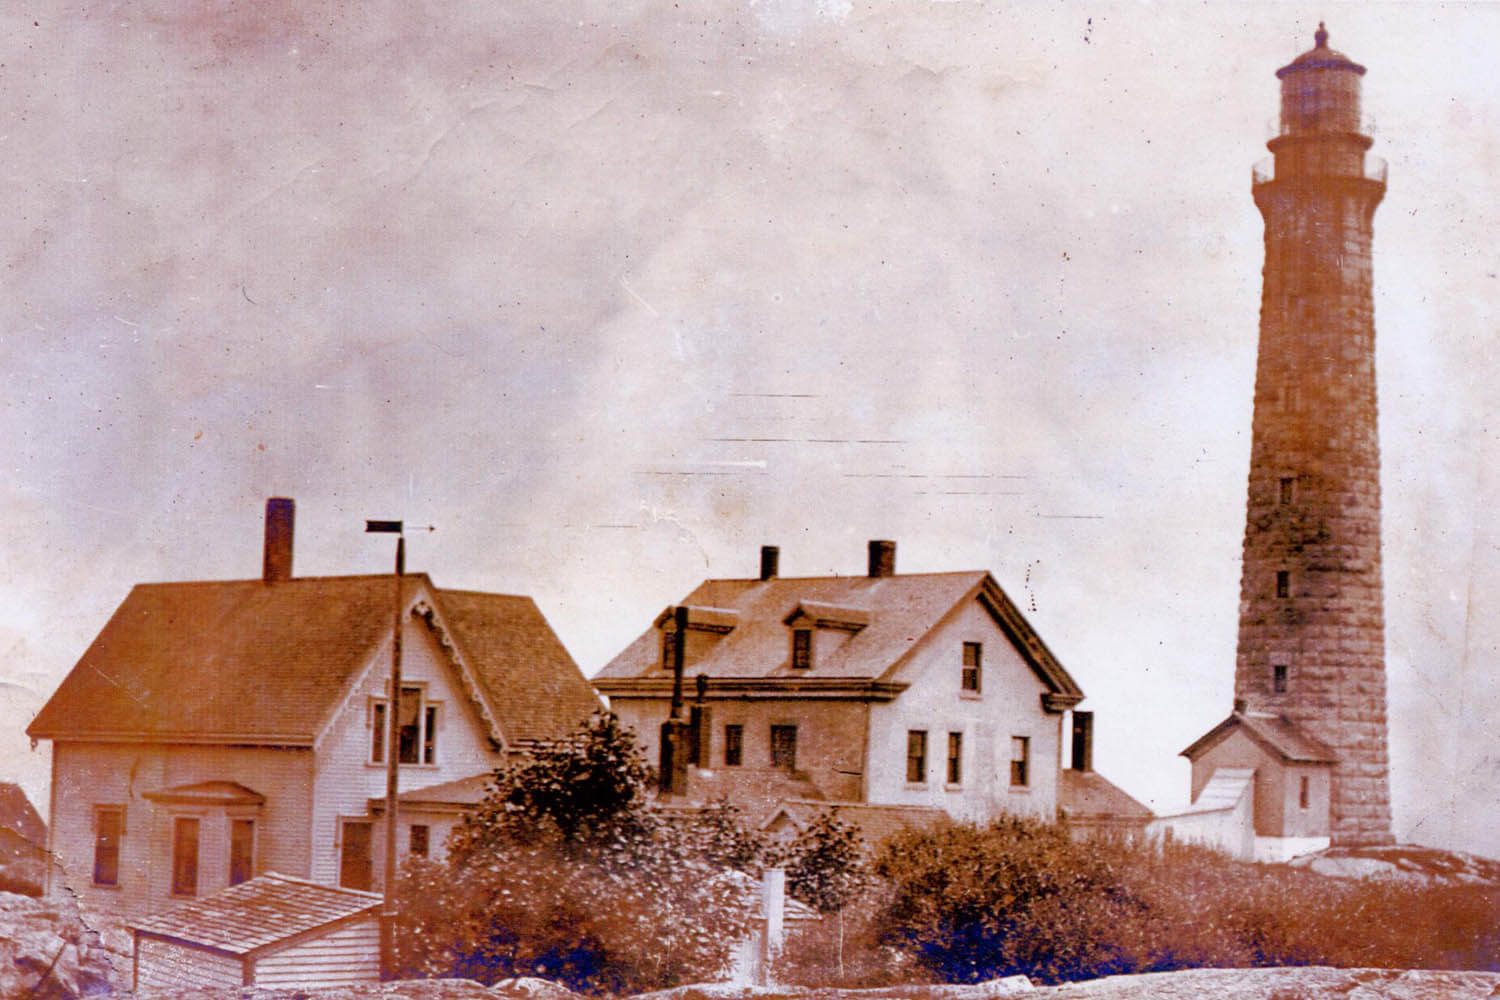 A picture of some houses in the past.